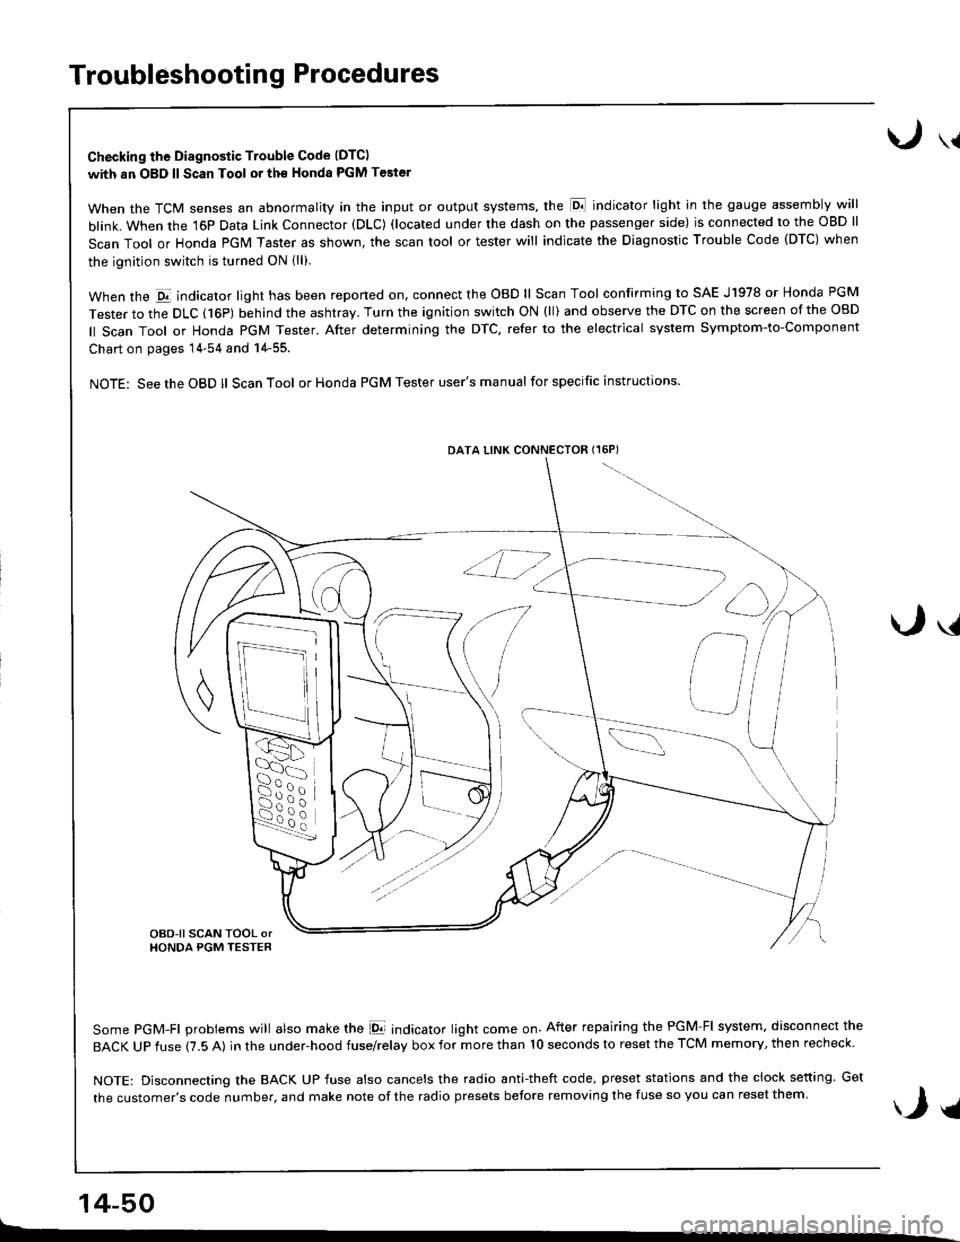 HONDA INTEGRA 1998 4.G Workshop Manual Troubleshooting Procedures
Checking the Diagnostic Trouble Code (DTC)
with an OBD ll Scan Tool or th€ Honda PGM Tester
When the TCM senses an abnormality in the input or output systems, the lD,] ind